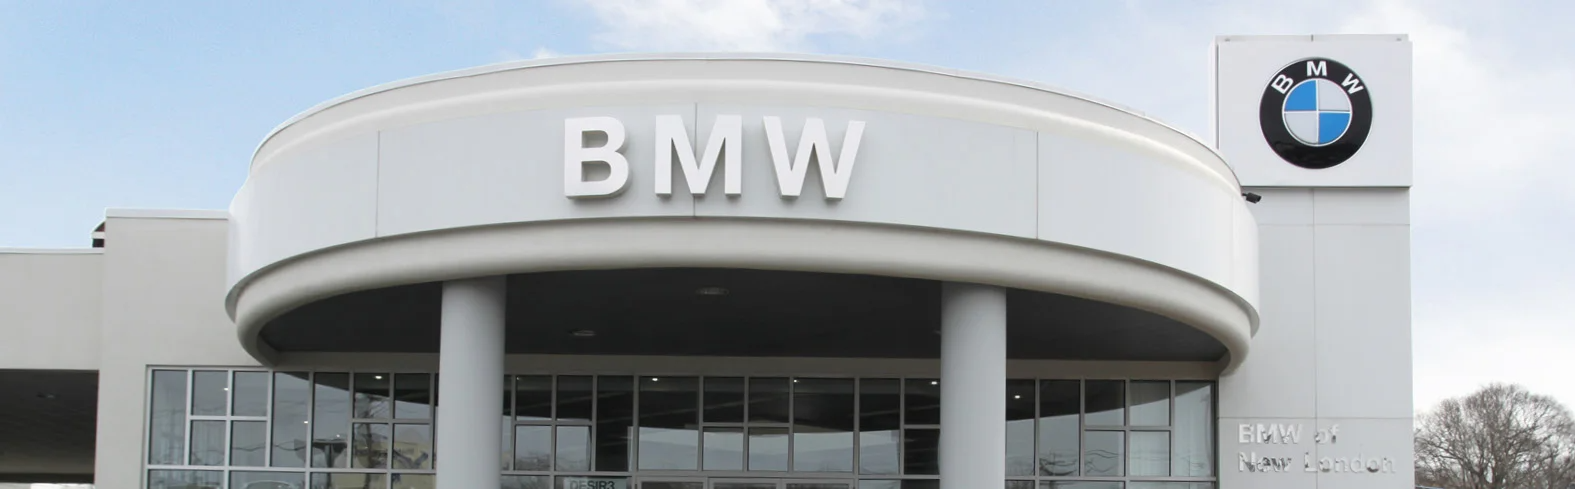 BMW of New London New London CT